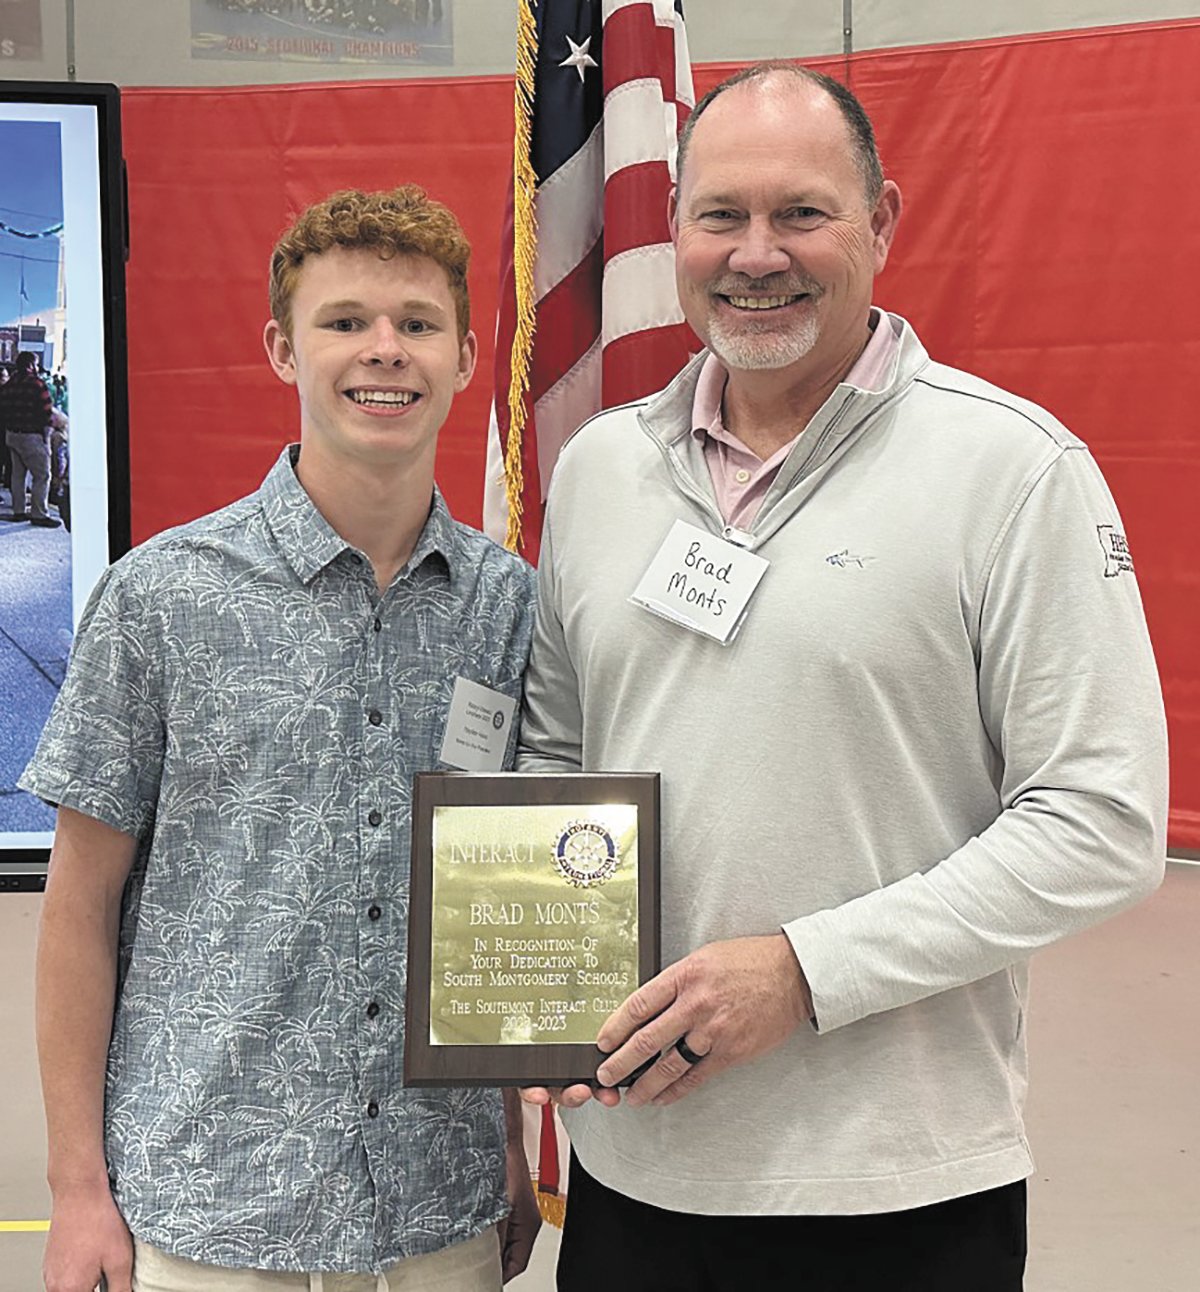 Brad Monts, president and CEO of Hoosier Heartland State Bank, accepts a plaque from Interact Club member Hayden Hess.